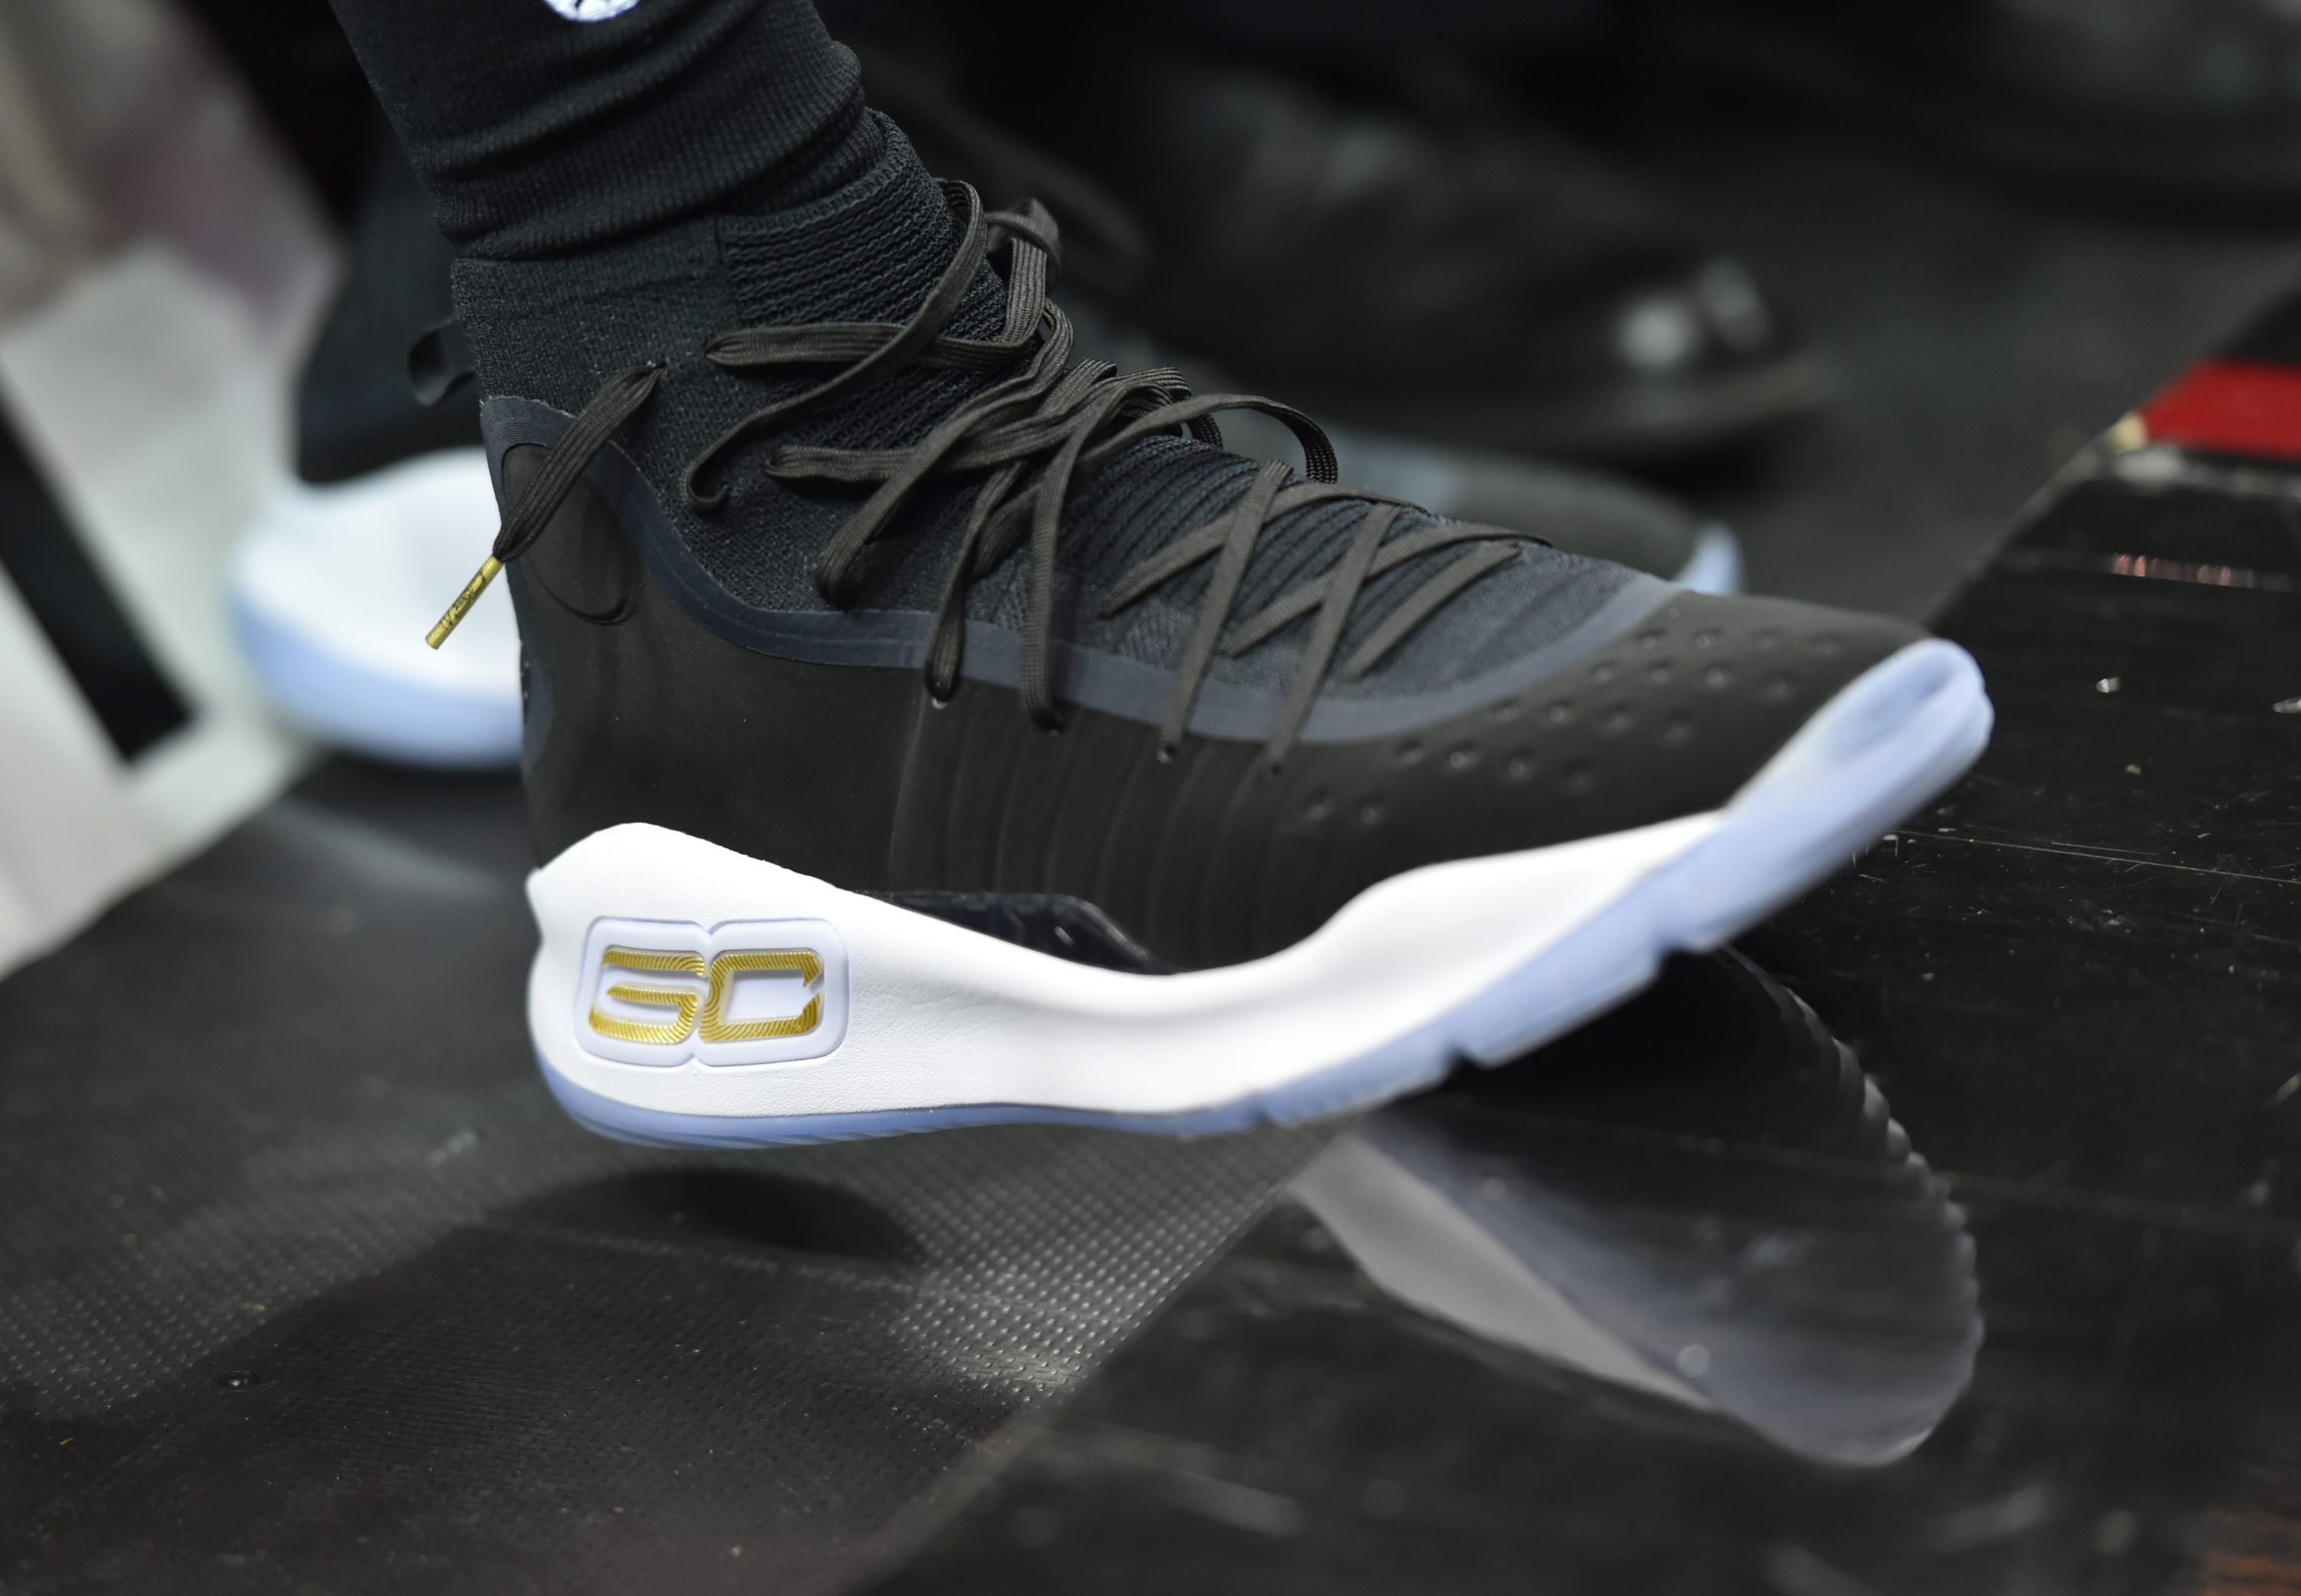 https://img.buzzfeed.com/buzzfeed-static/complex/images/icai4smbezwrnvbpqdrq/under-armour-curry-4-black-white.jpg